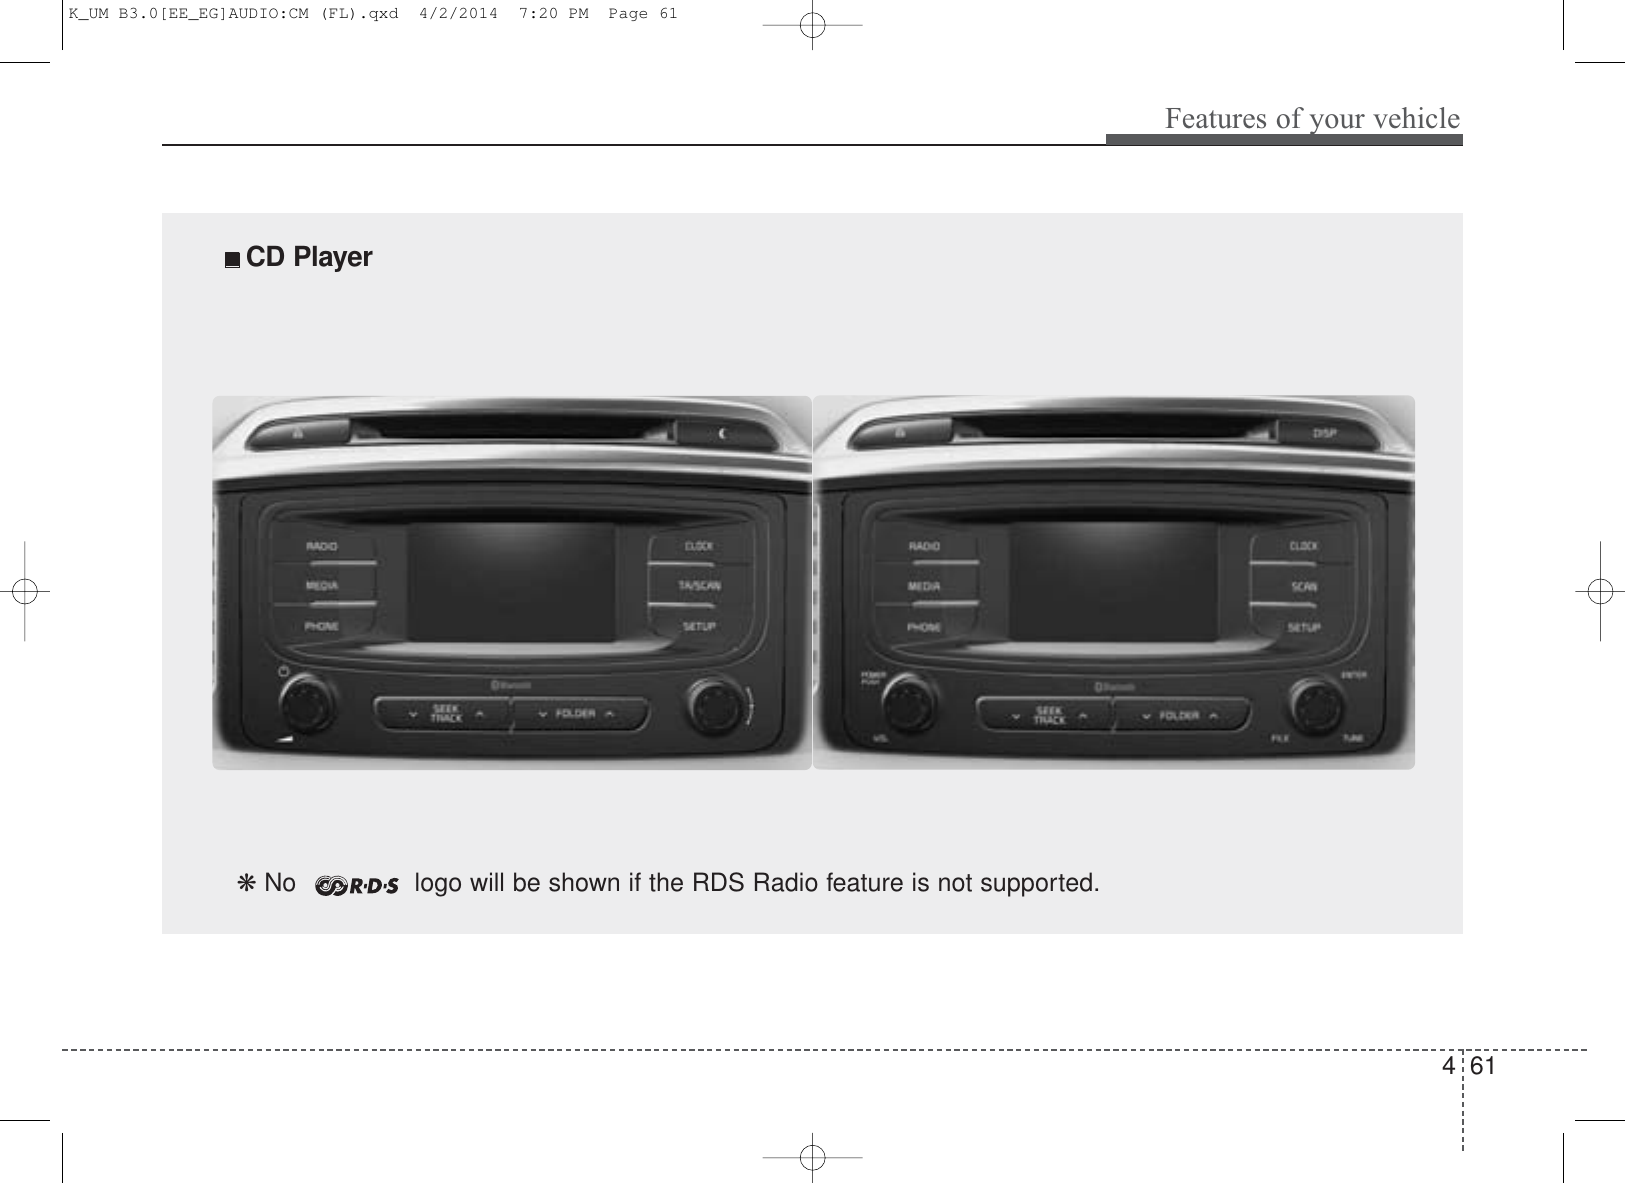 4 61Features of your vehicle■ CD Player ❋ No  logo will be shown if the RDS Radio feature is not supported.K_UM B3.0[EE_EG]AUDIO:CM (FL).qxd  4/2/2014  7:20 PM  Page 61